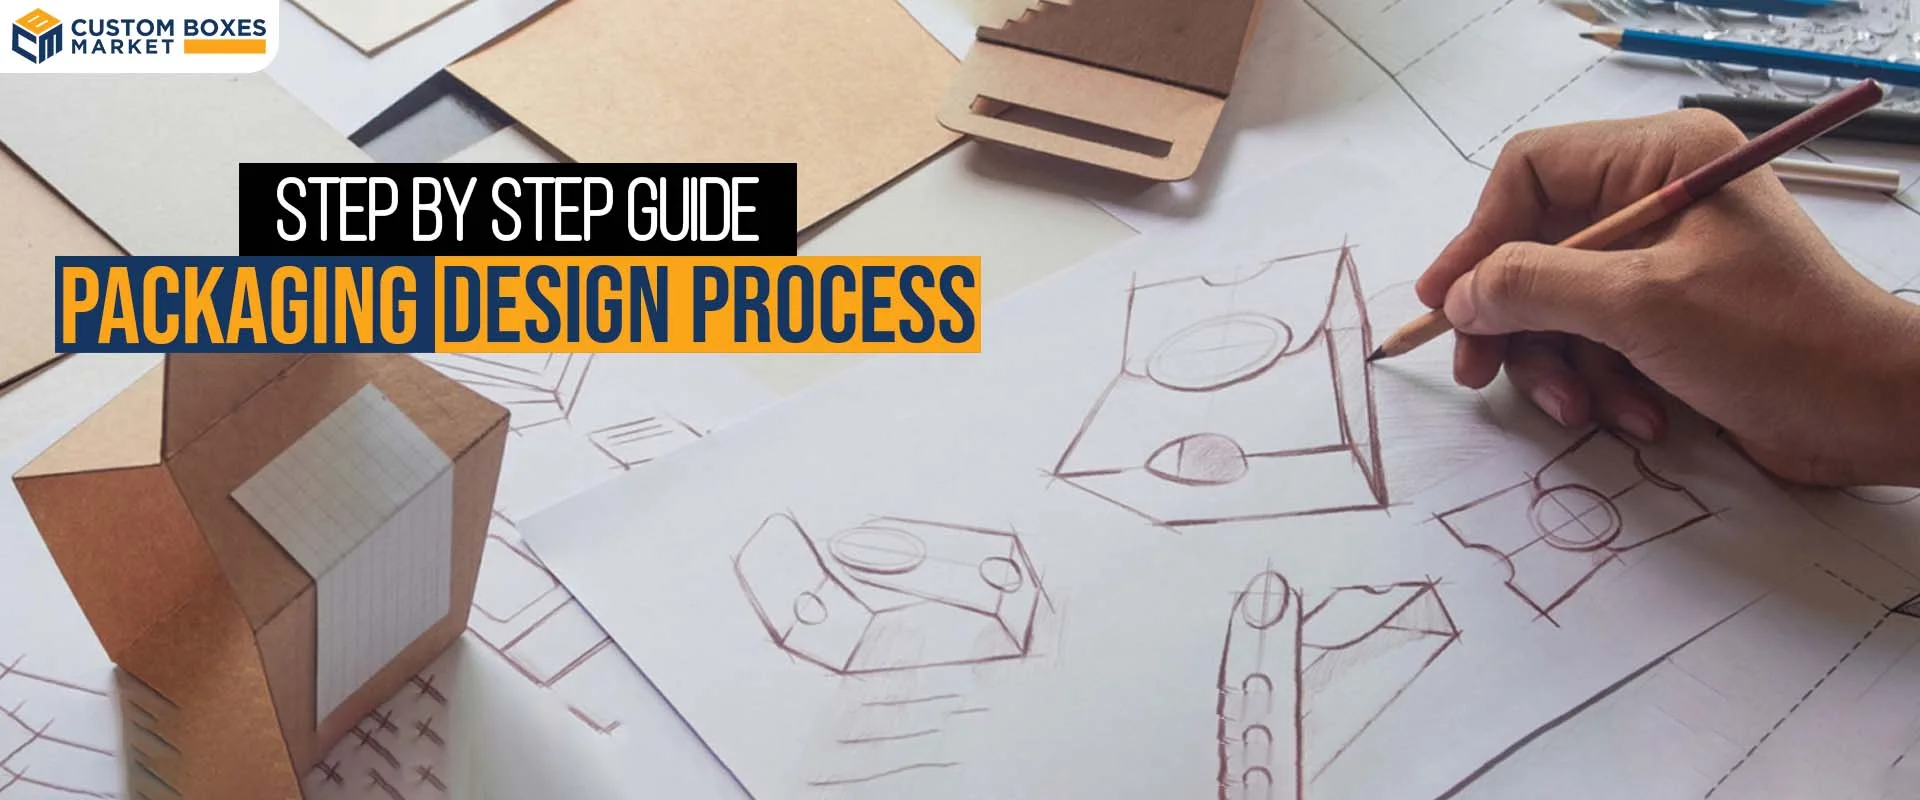 Packaging Design Process | Step By Step Guide | CBM